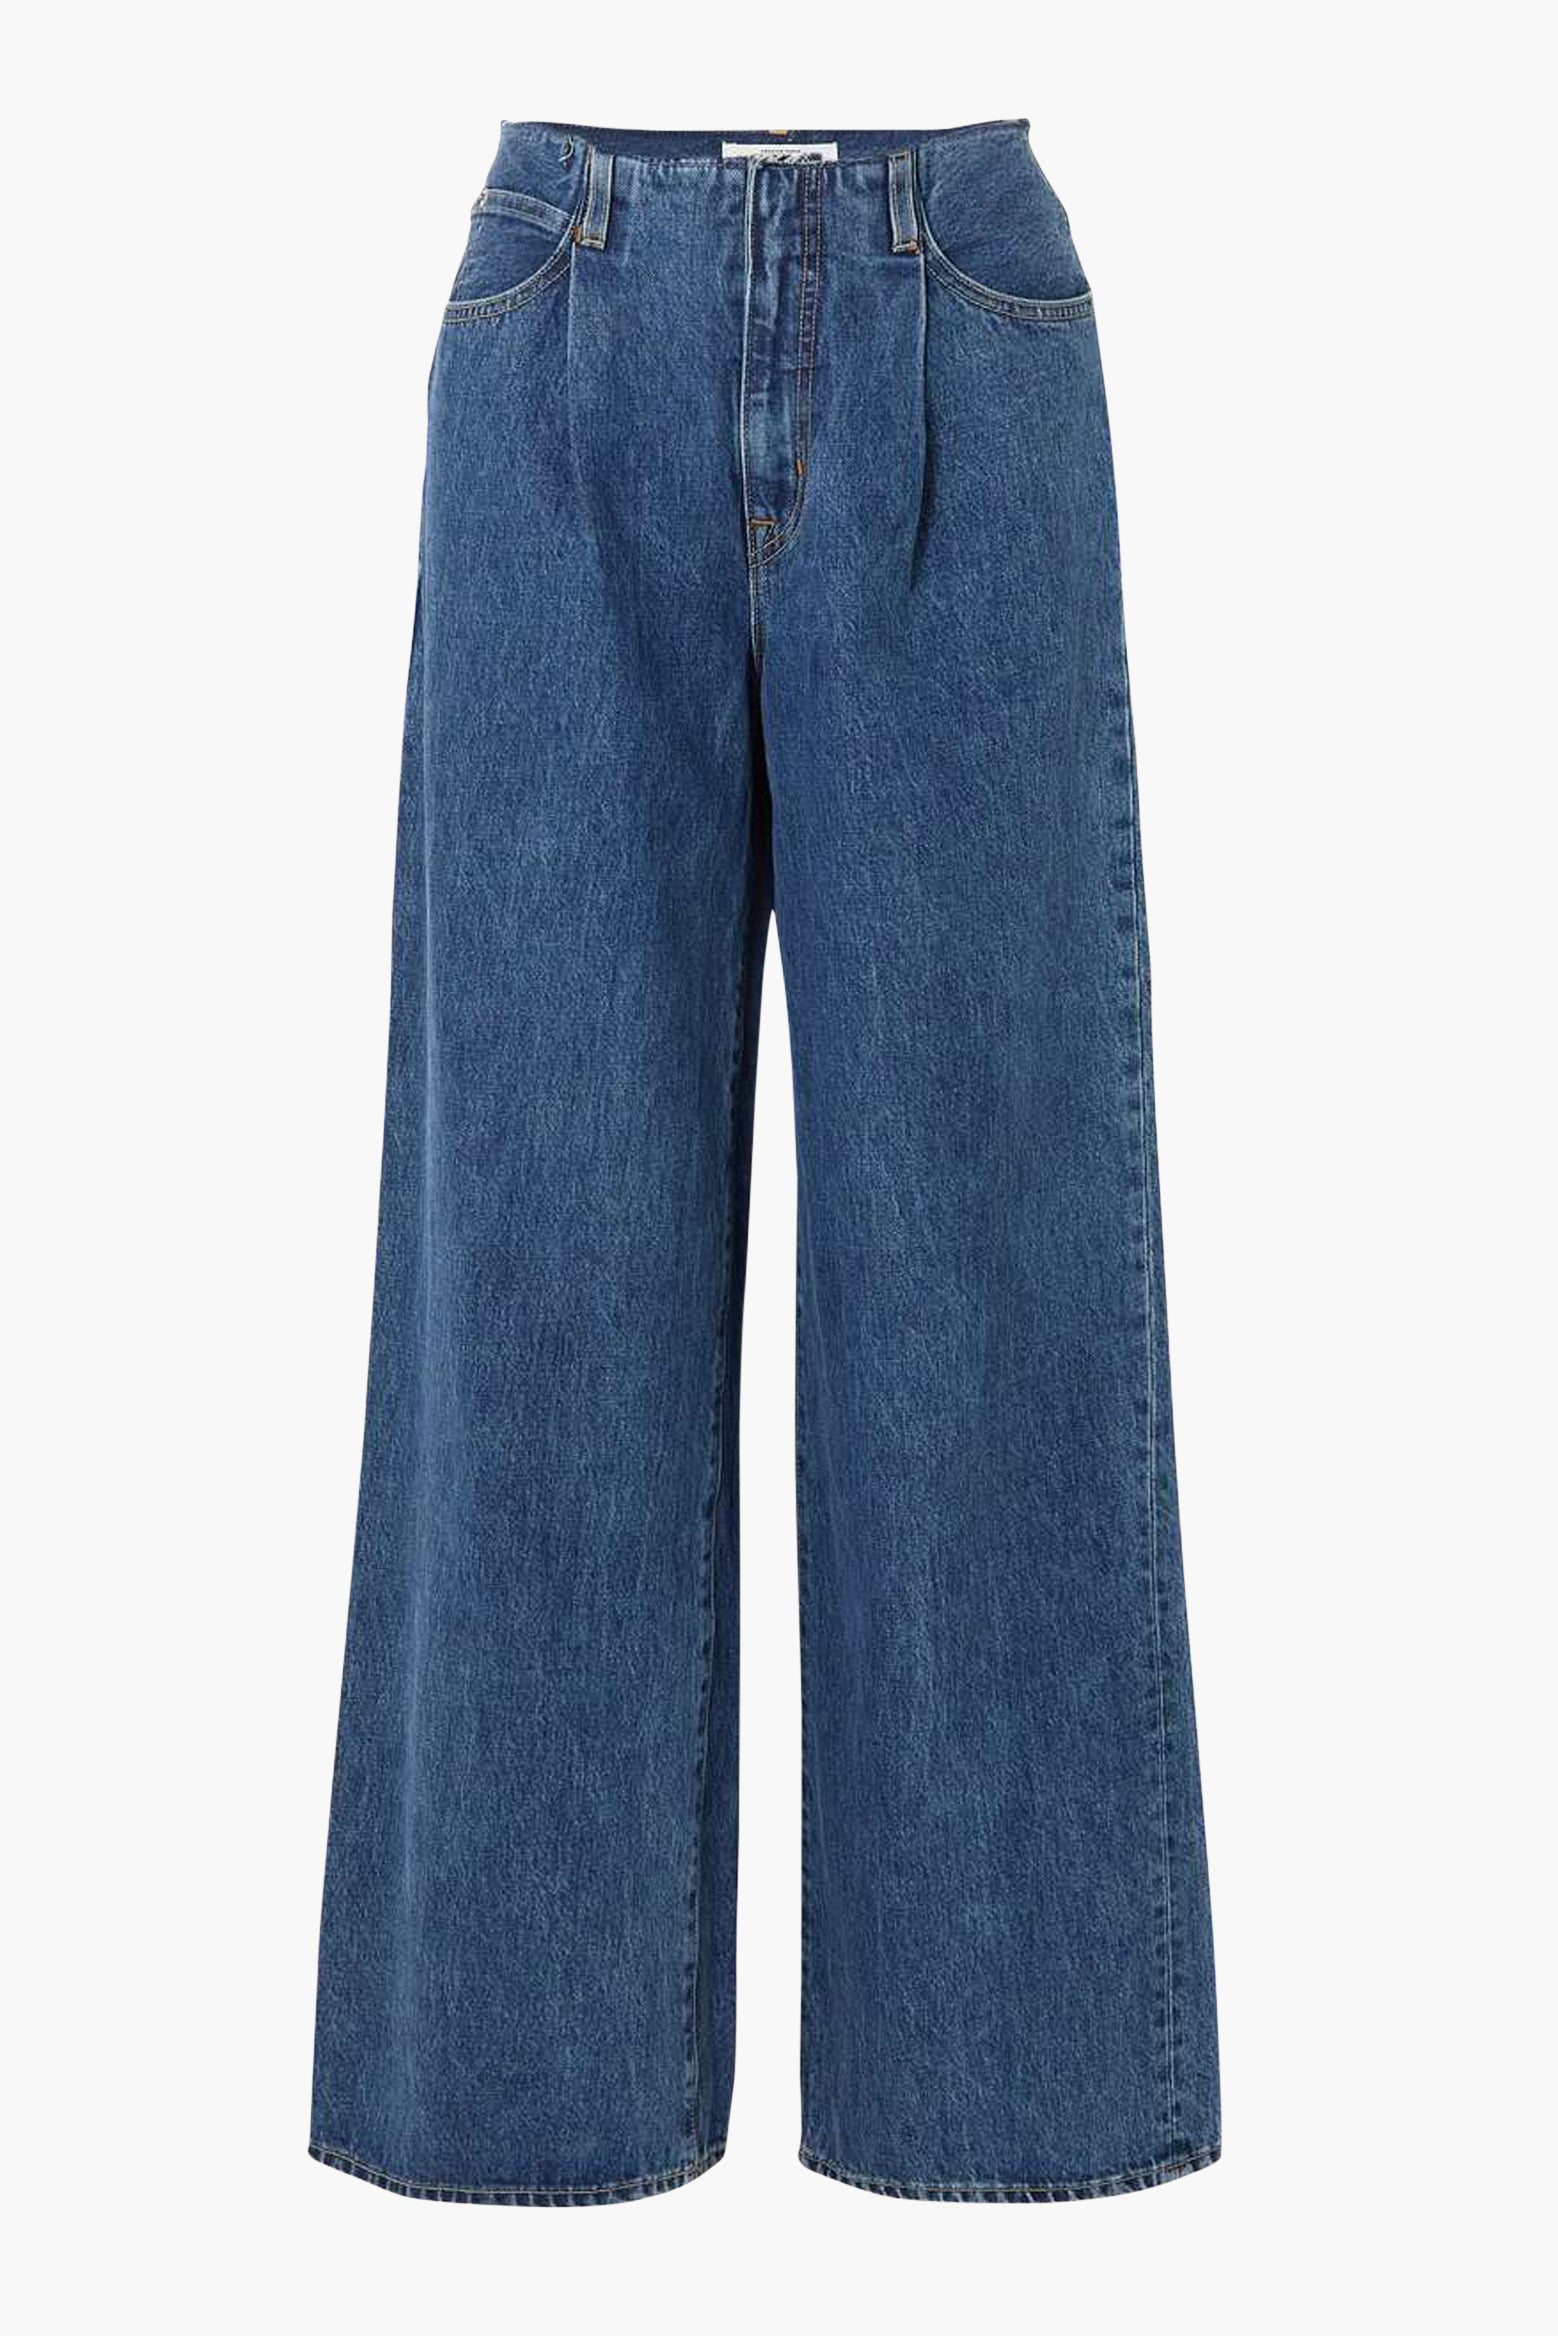 Slvrlake Taylor Wide Pleat Jean in Sweet Memory available at TNT The New Trend Australia.